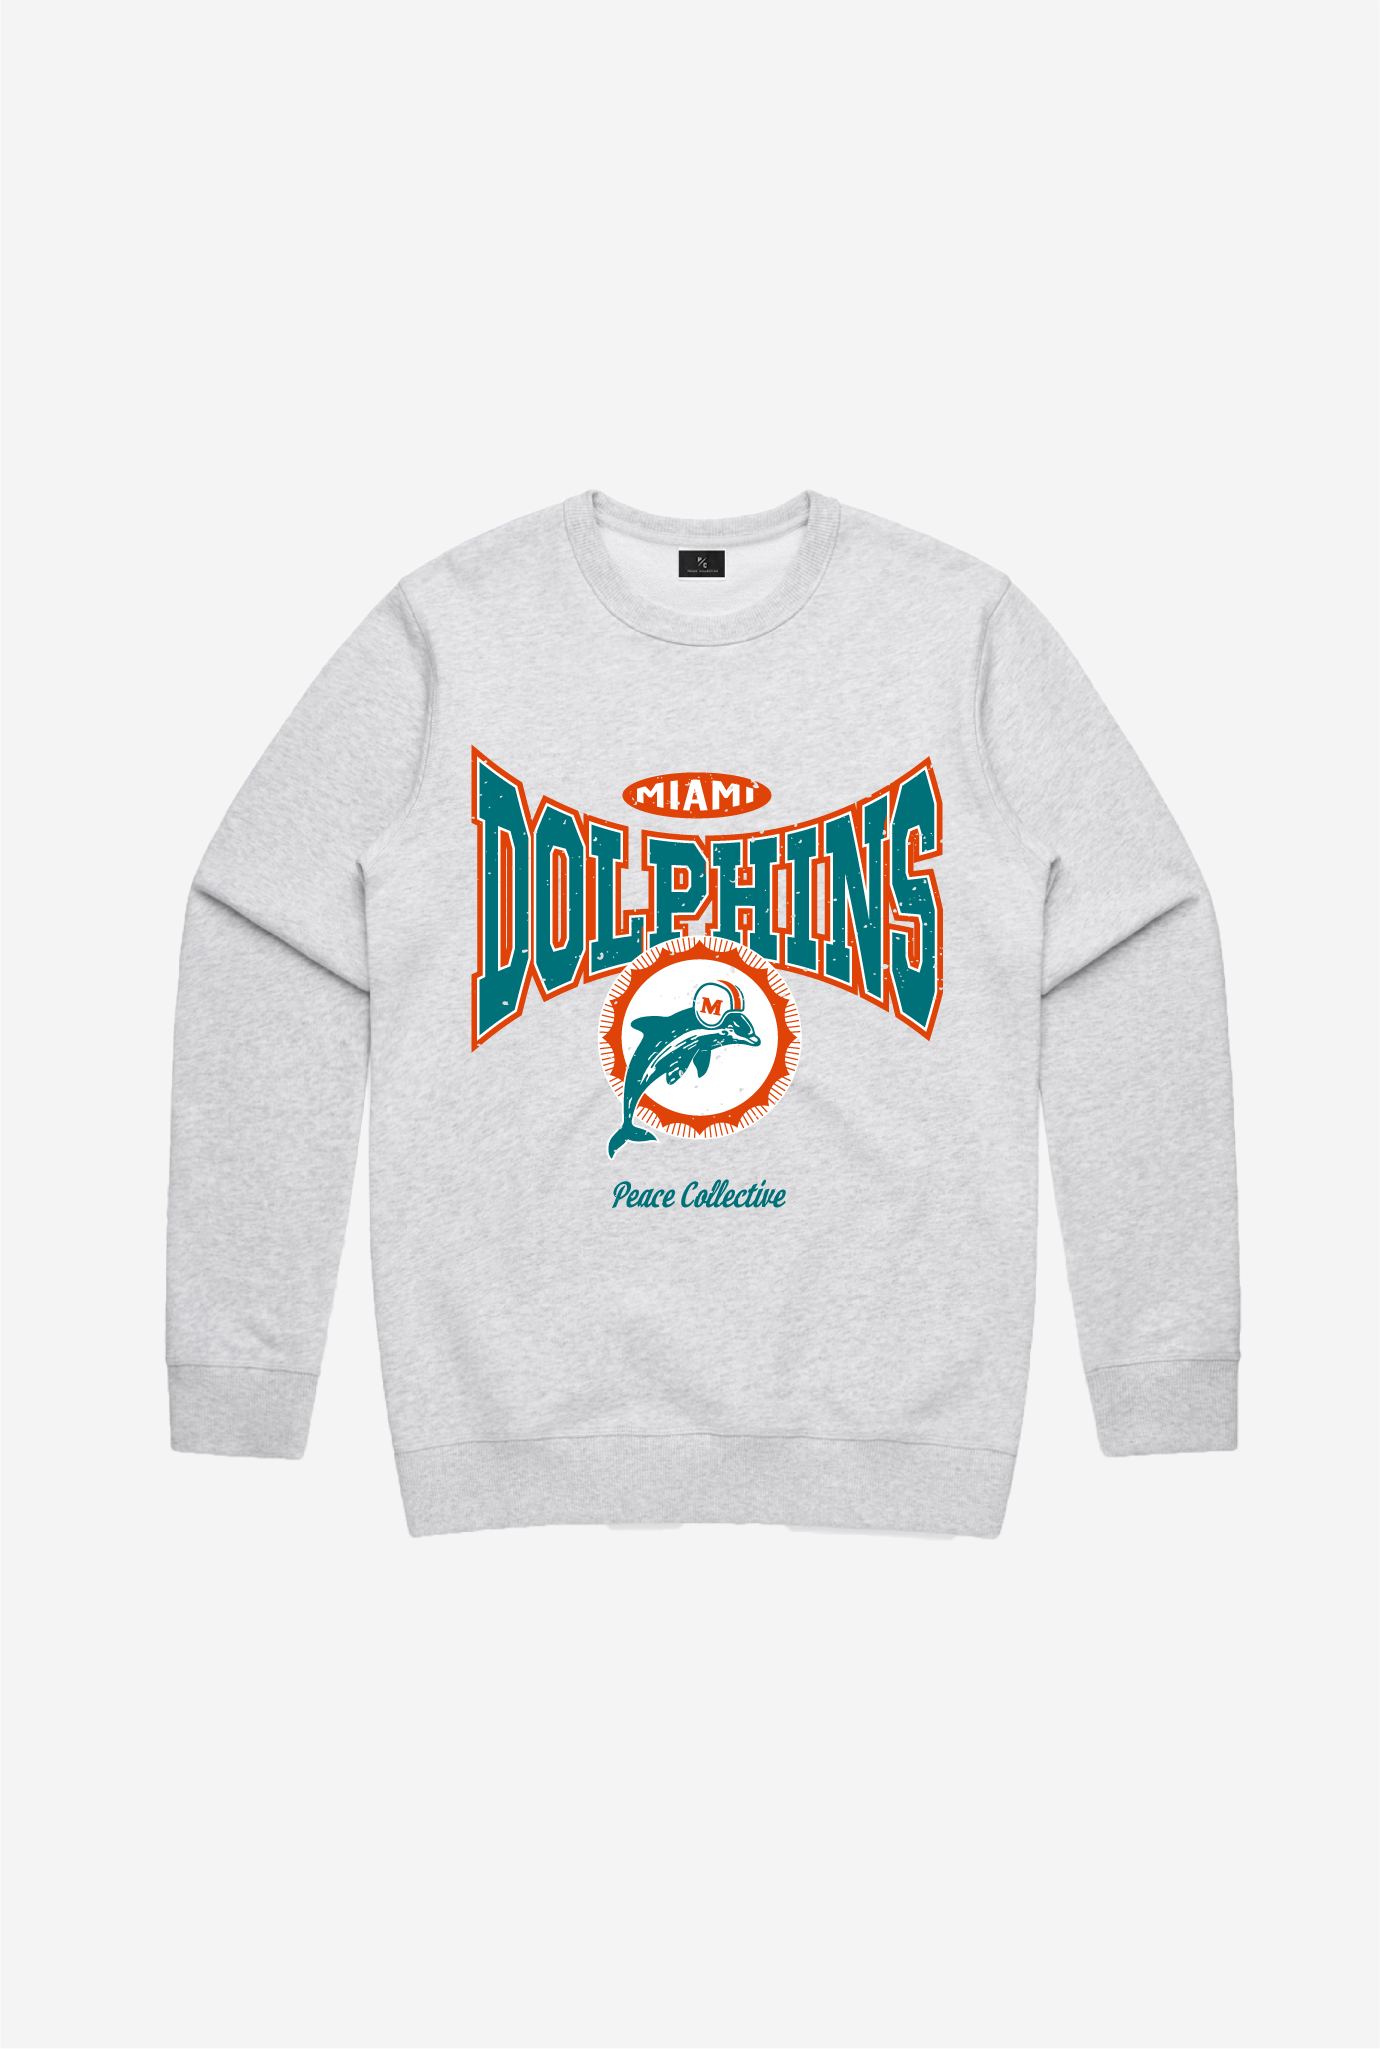 Miami Dolphins Washed Graphic Crewneck - Ash